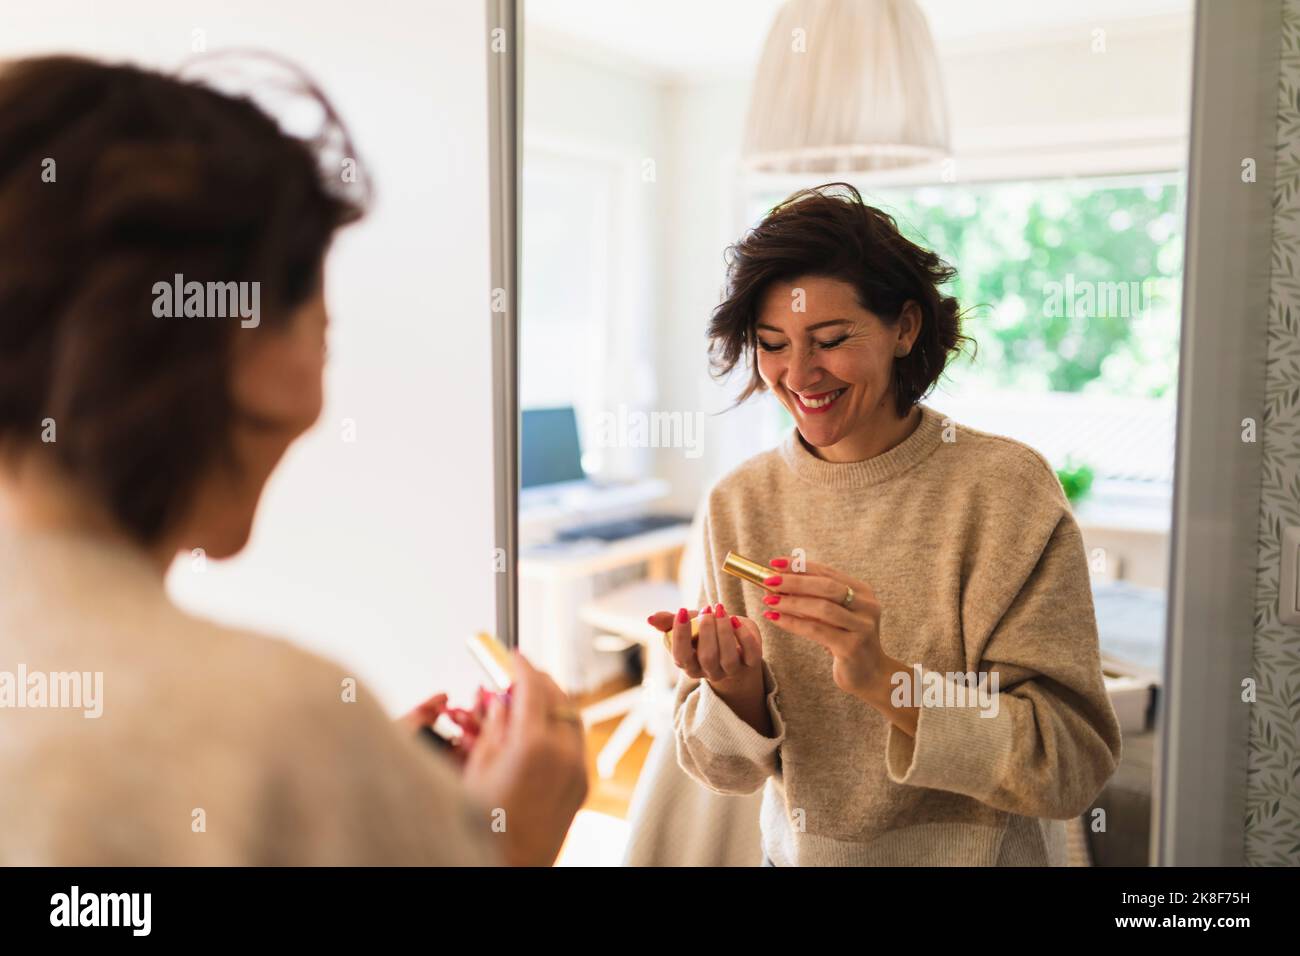 Happy woman holding lipstick in front of mirror at home Stock Photo